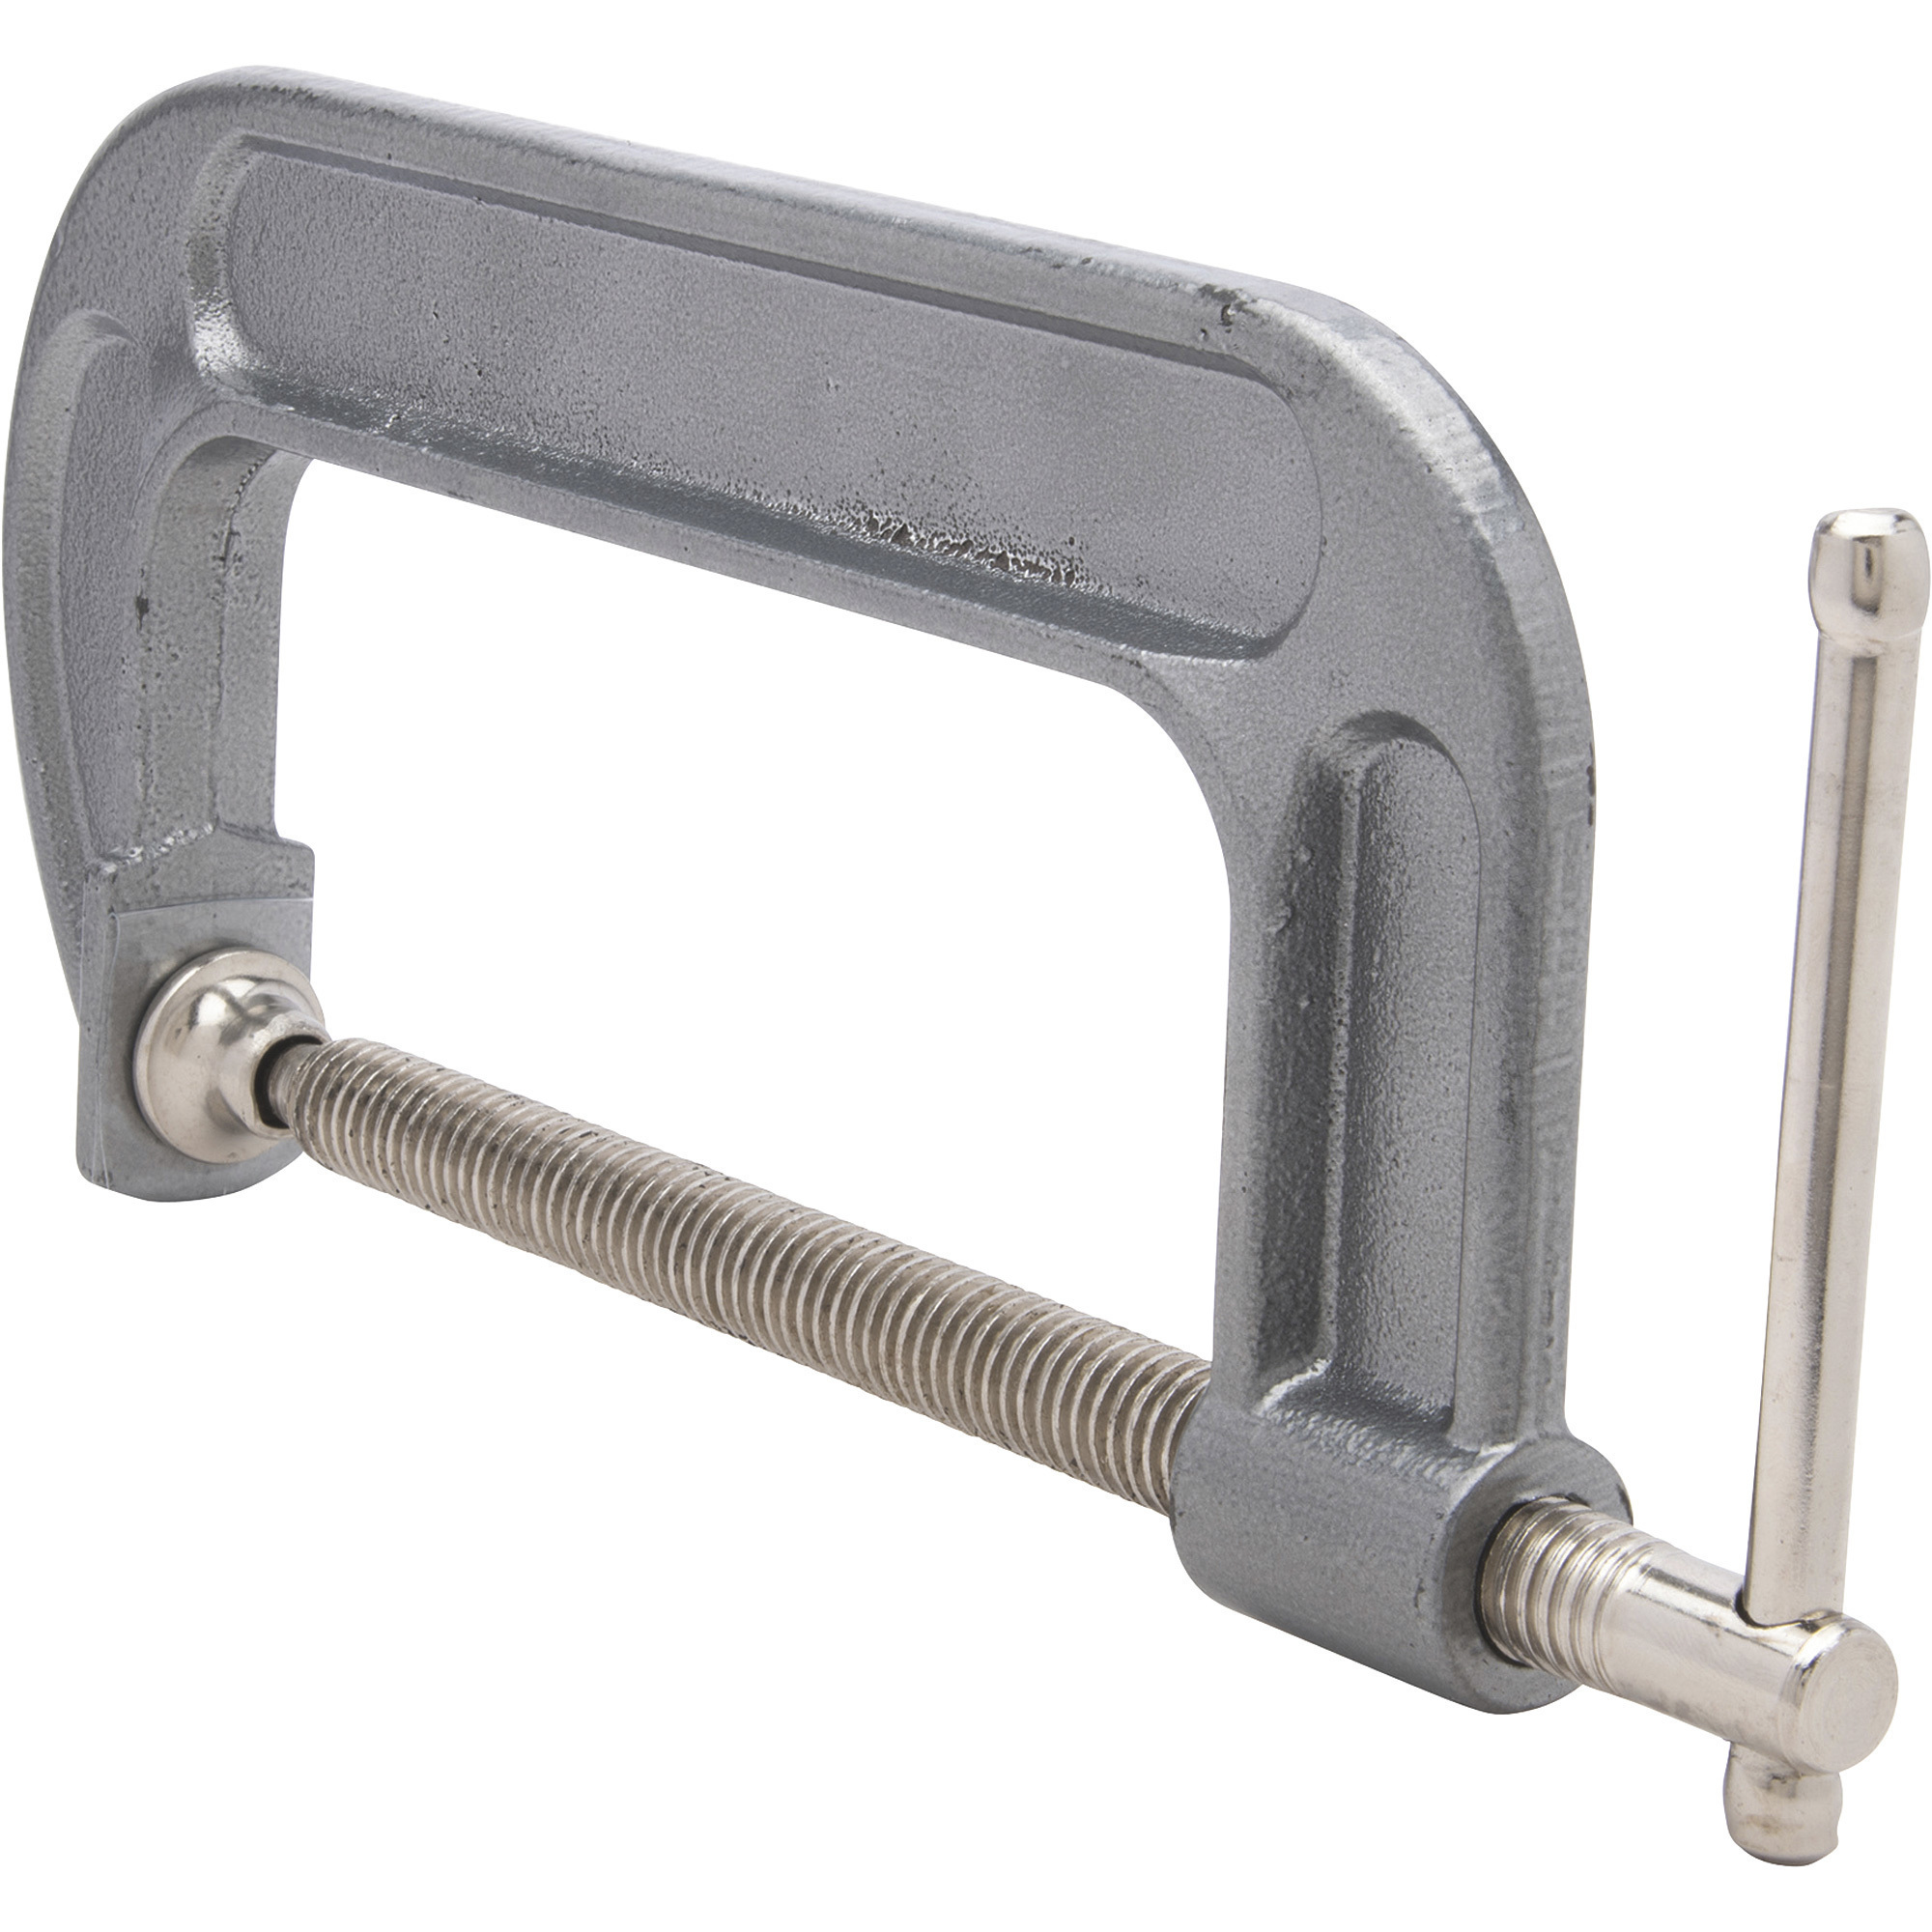 Lincoln Electric Welding Clamp, 4Inch, Model KH906